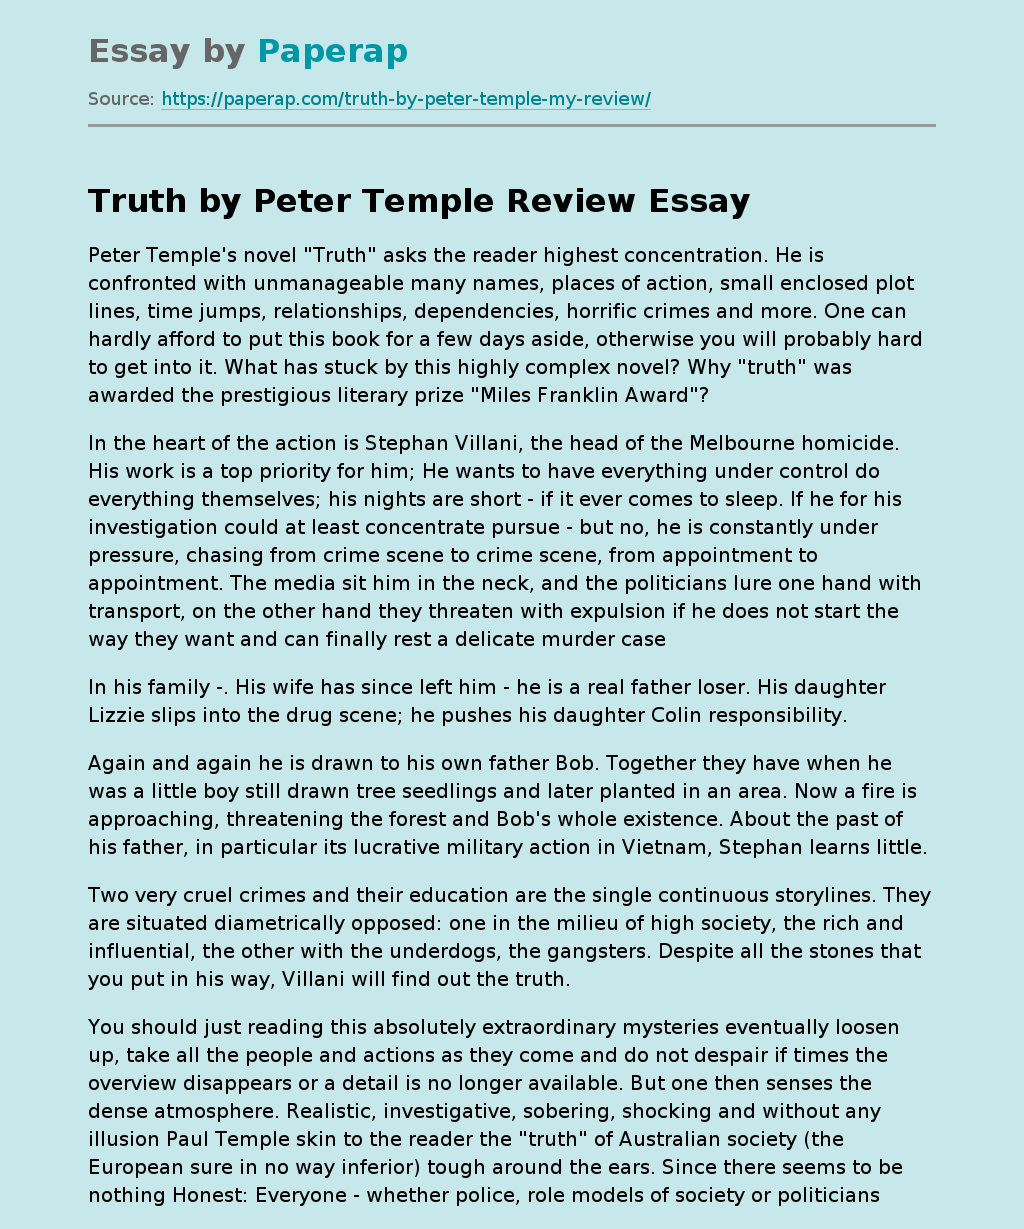 Truth by Peter Temple Review